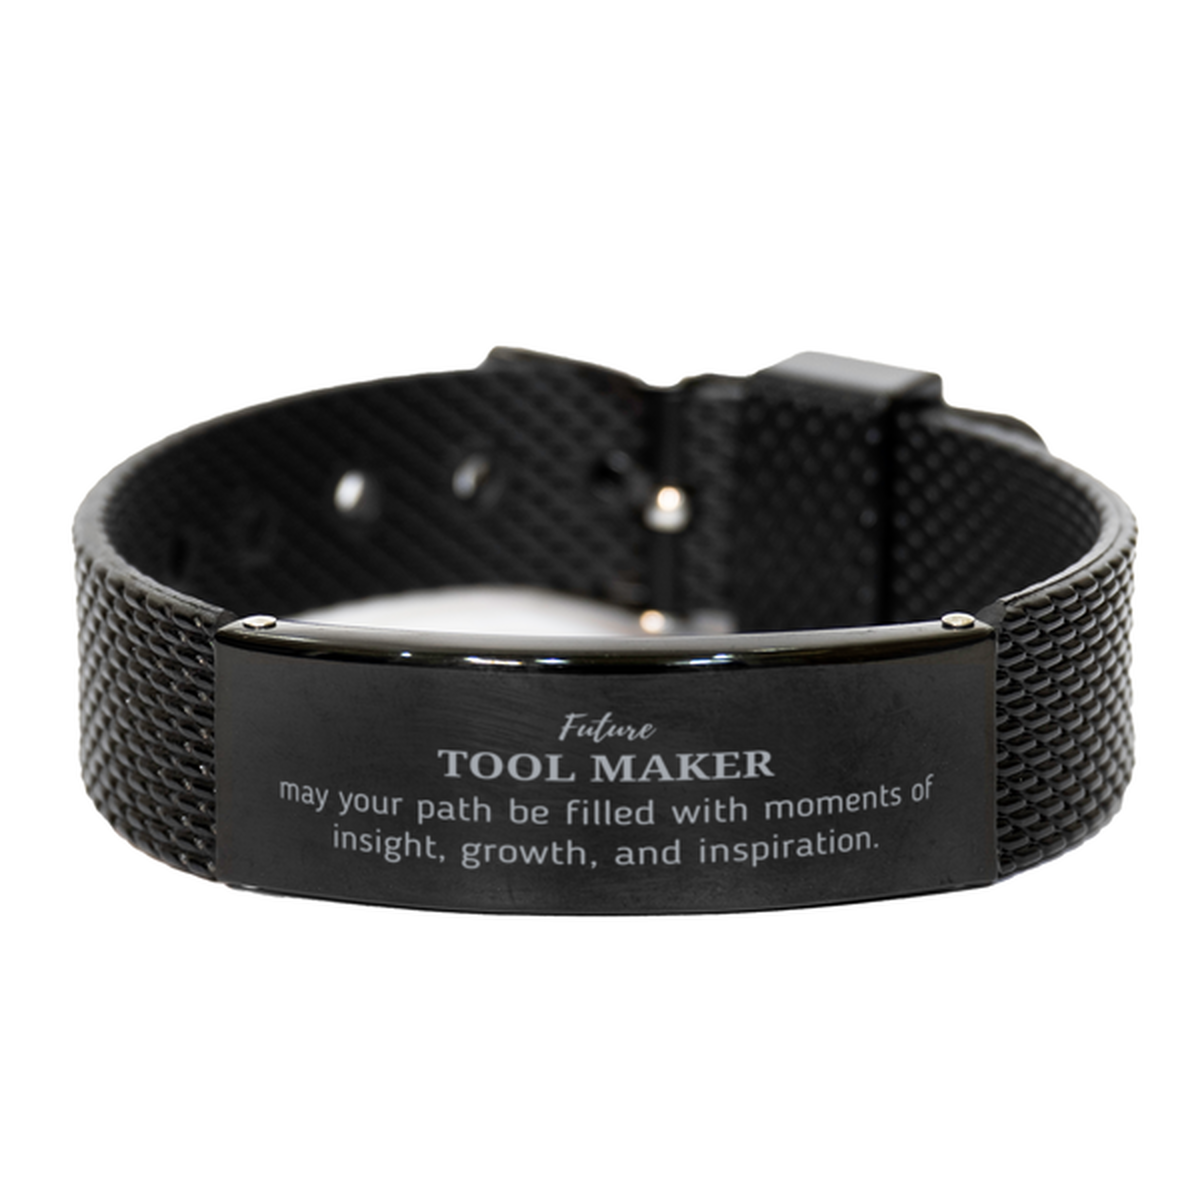 Future Tool Maker Gifts, May your path be filled with moments of insight, Graduation Gifts for New Tool Maker, Christmas Unique Black Shark Mesh Bracelet For Men, Women, Friends